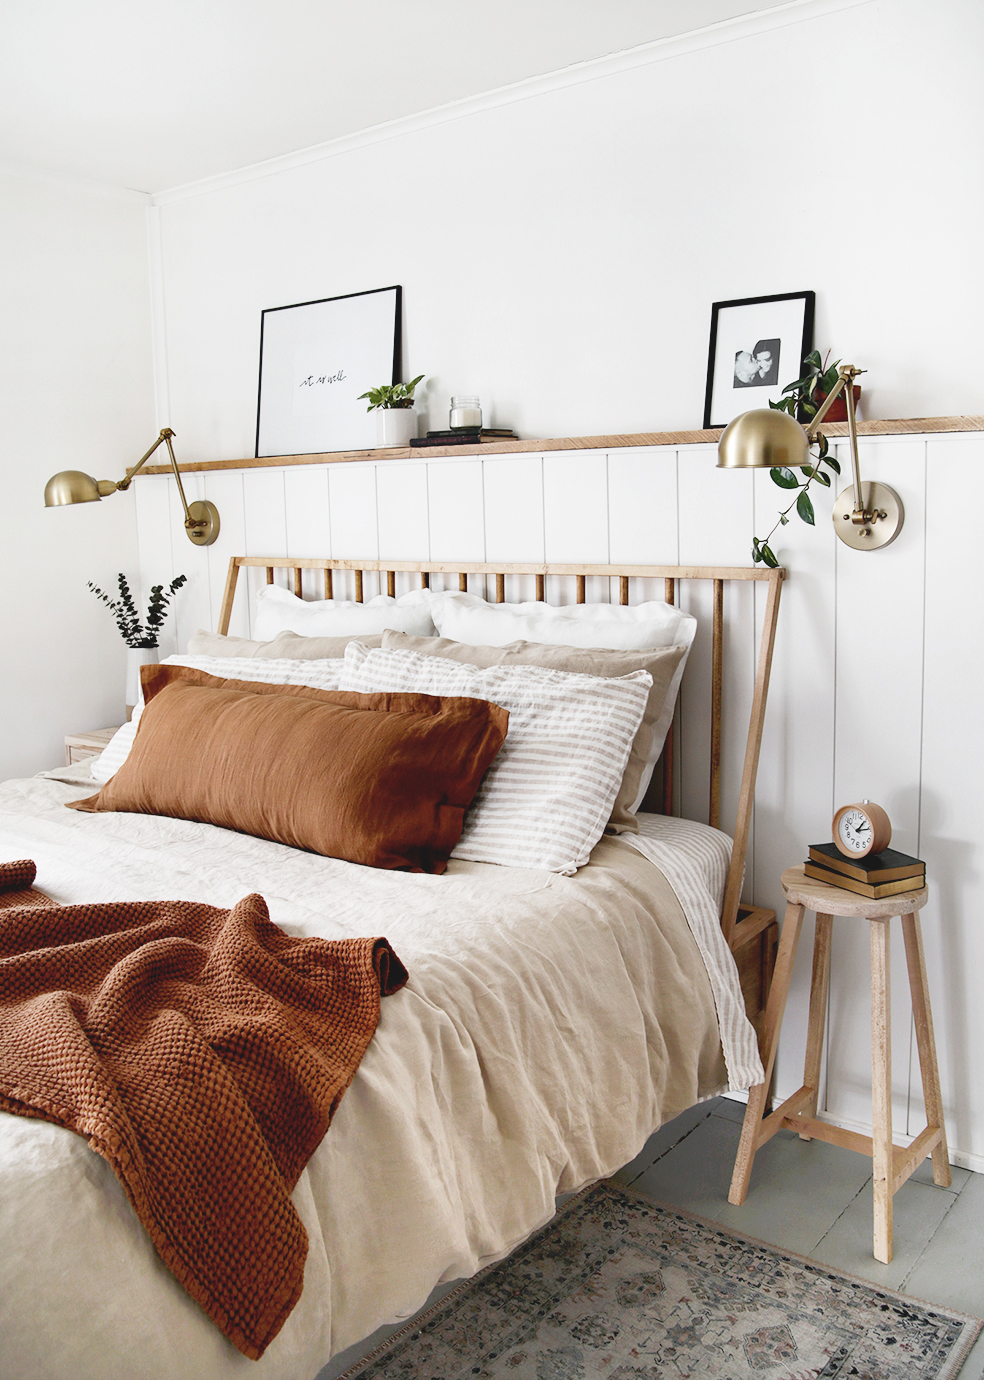 Diy Wood Dowel Headboard Learn How To, How To Attach A Bed Frame The Wall